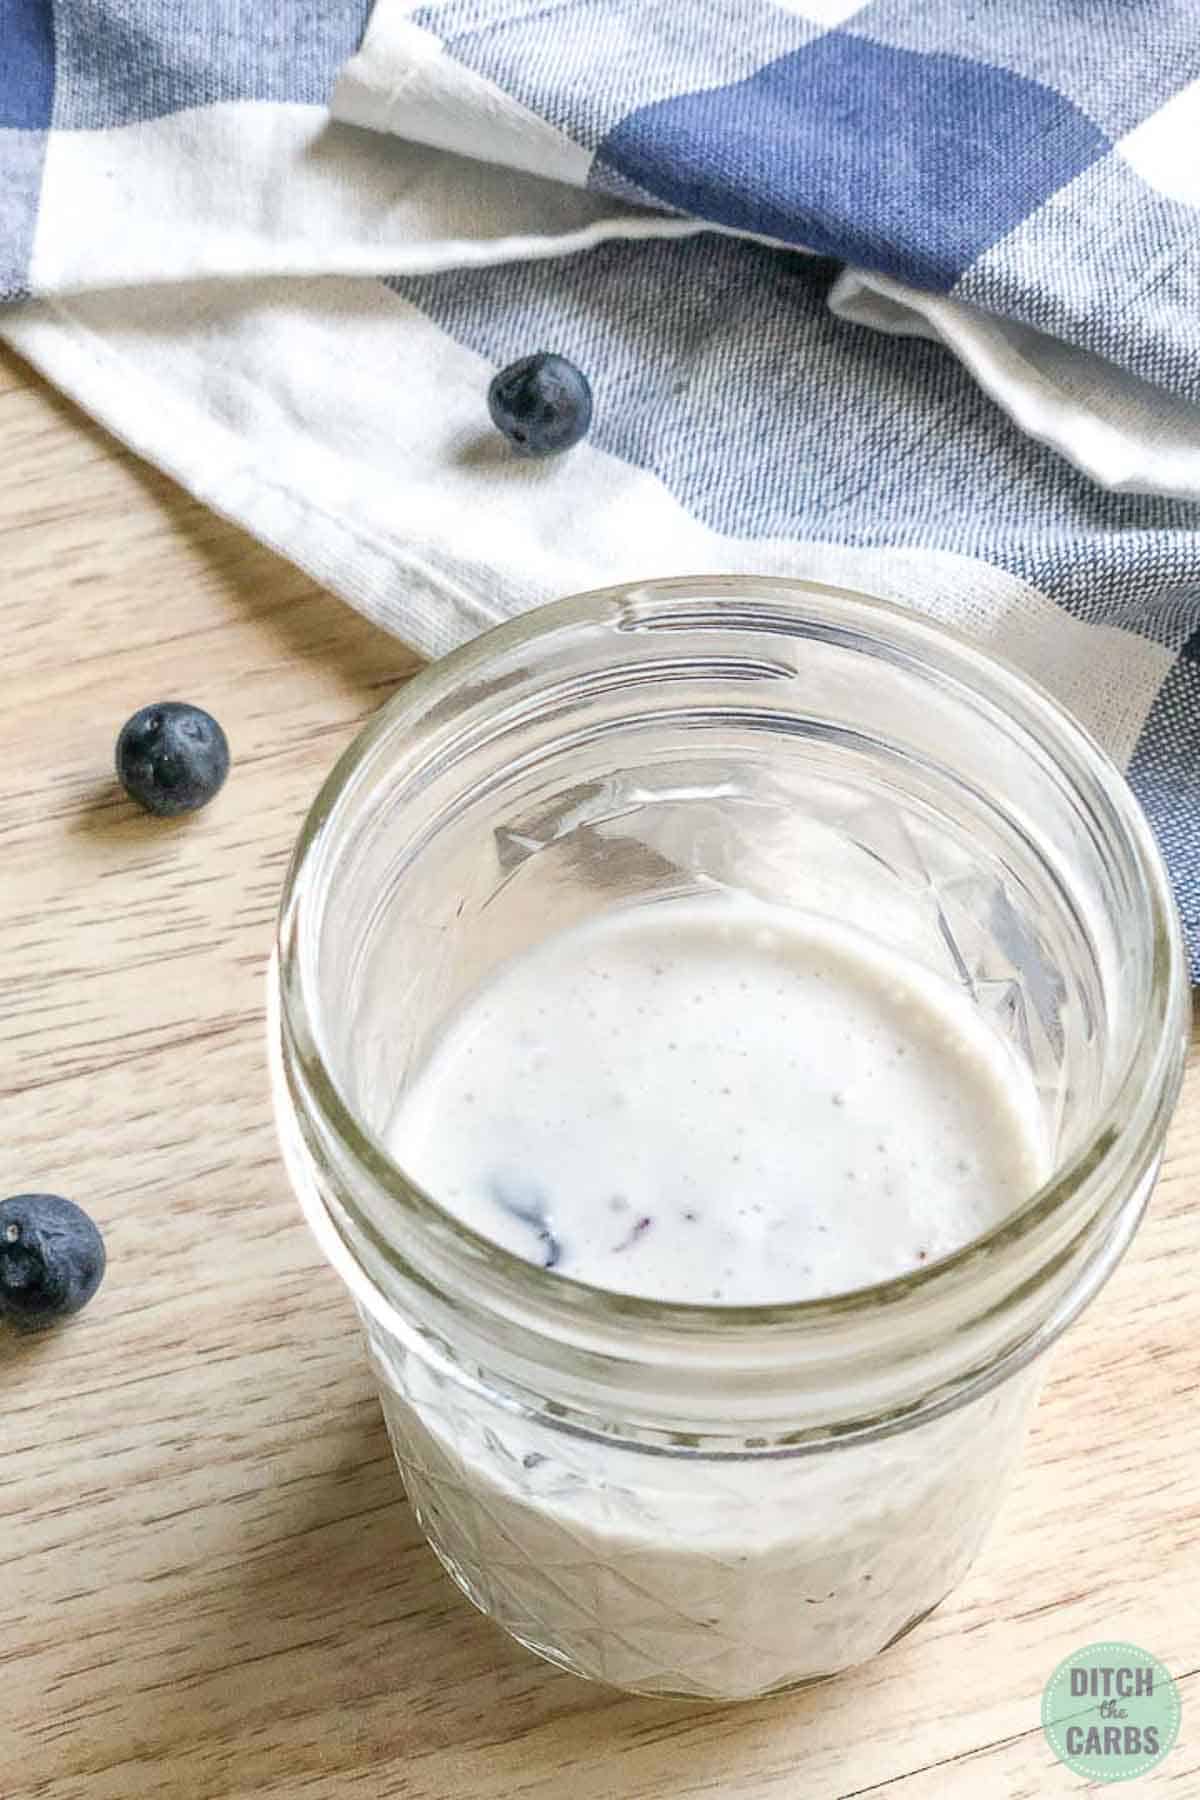 Blueberries have been smashed into the cheesecake batter in a clear glass jar. 